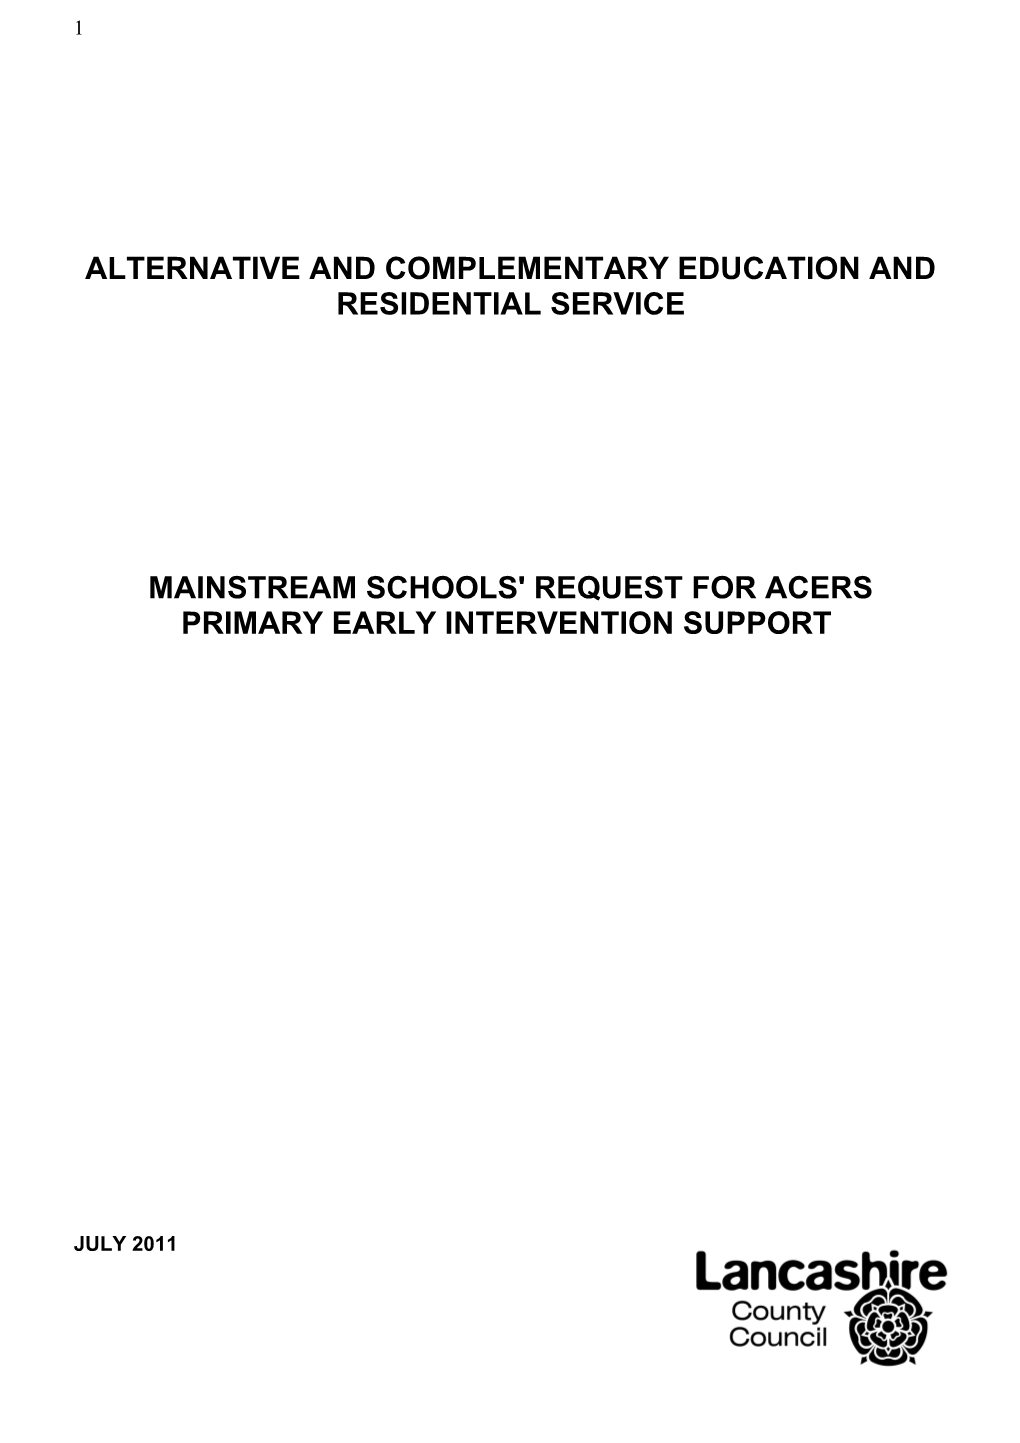 Alternative and Complementary Education and Residential Service